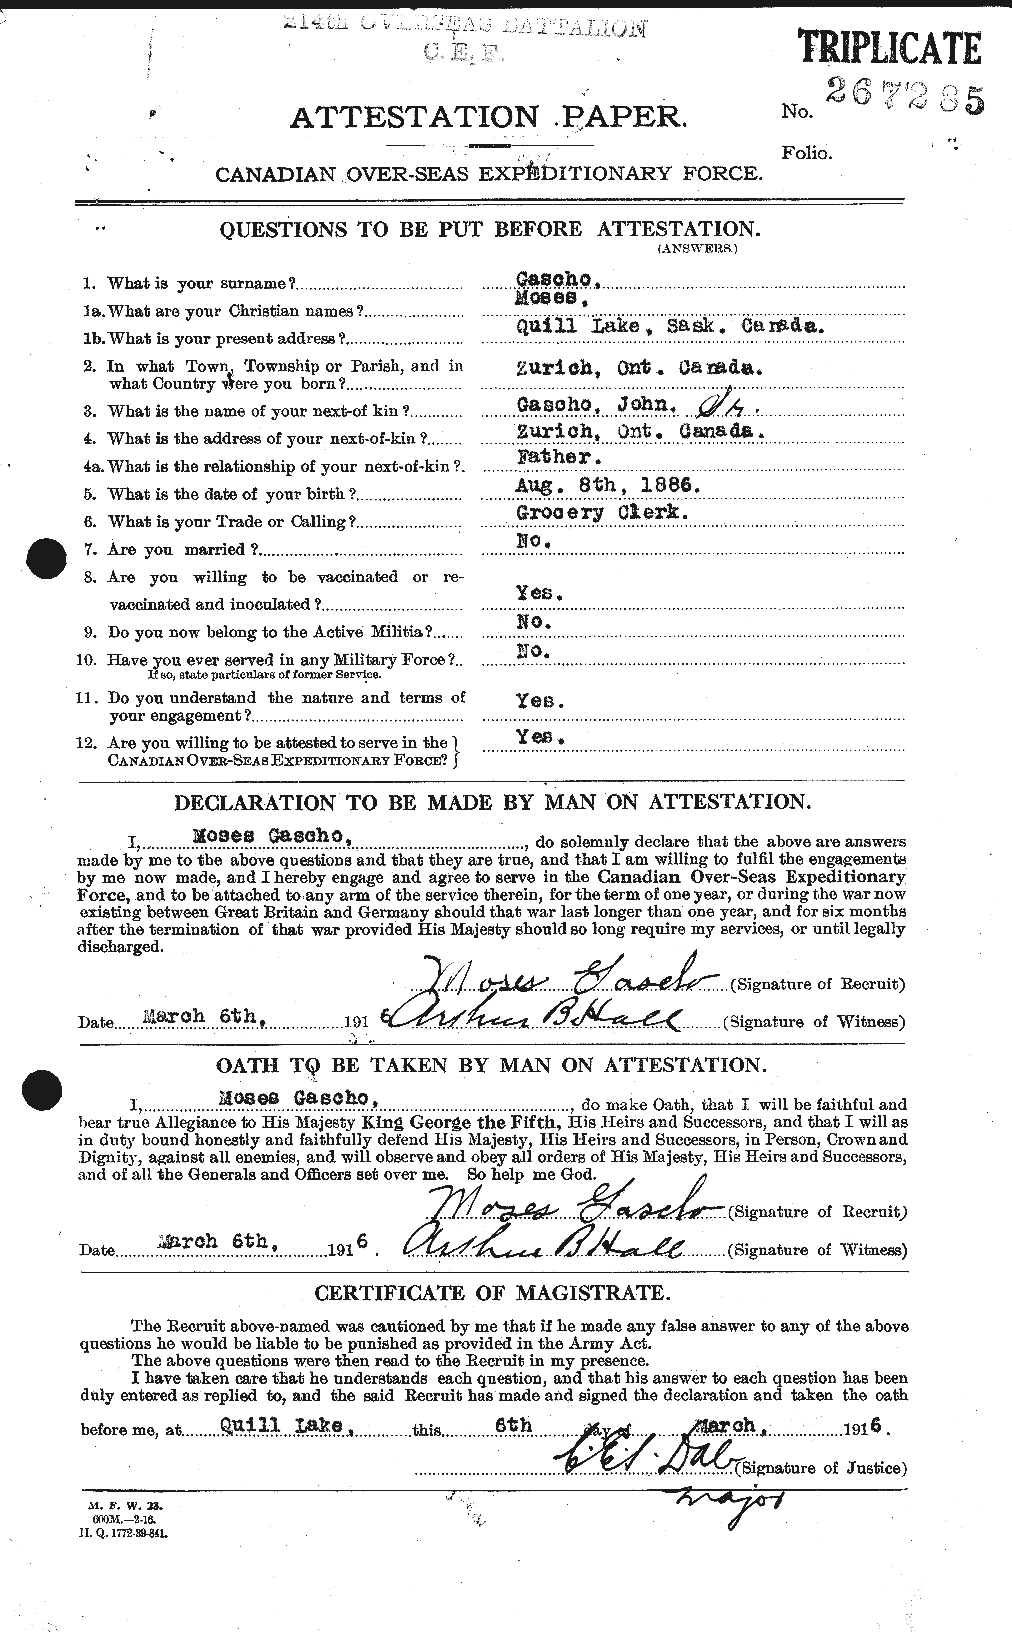 Personnel Records of the First World War - CEF 344967a